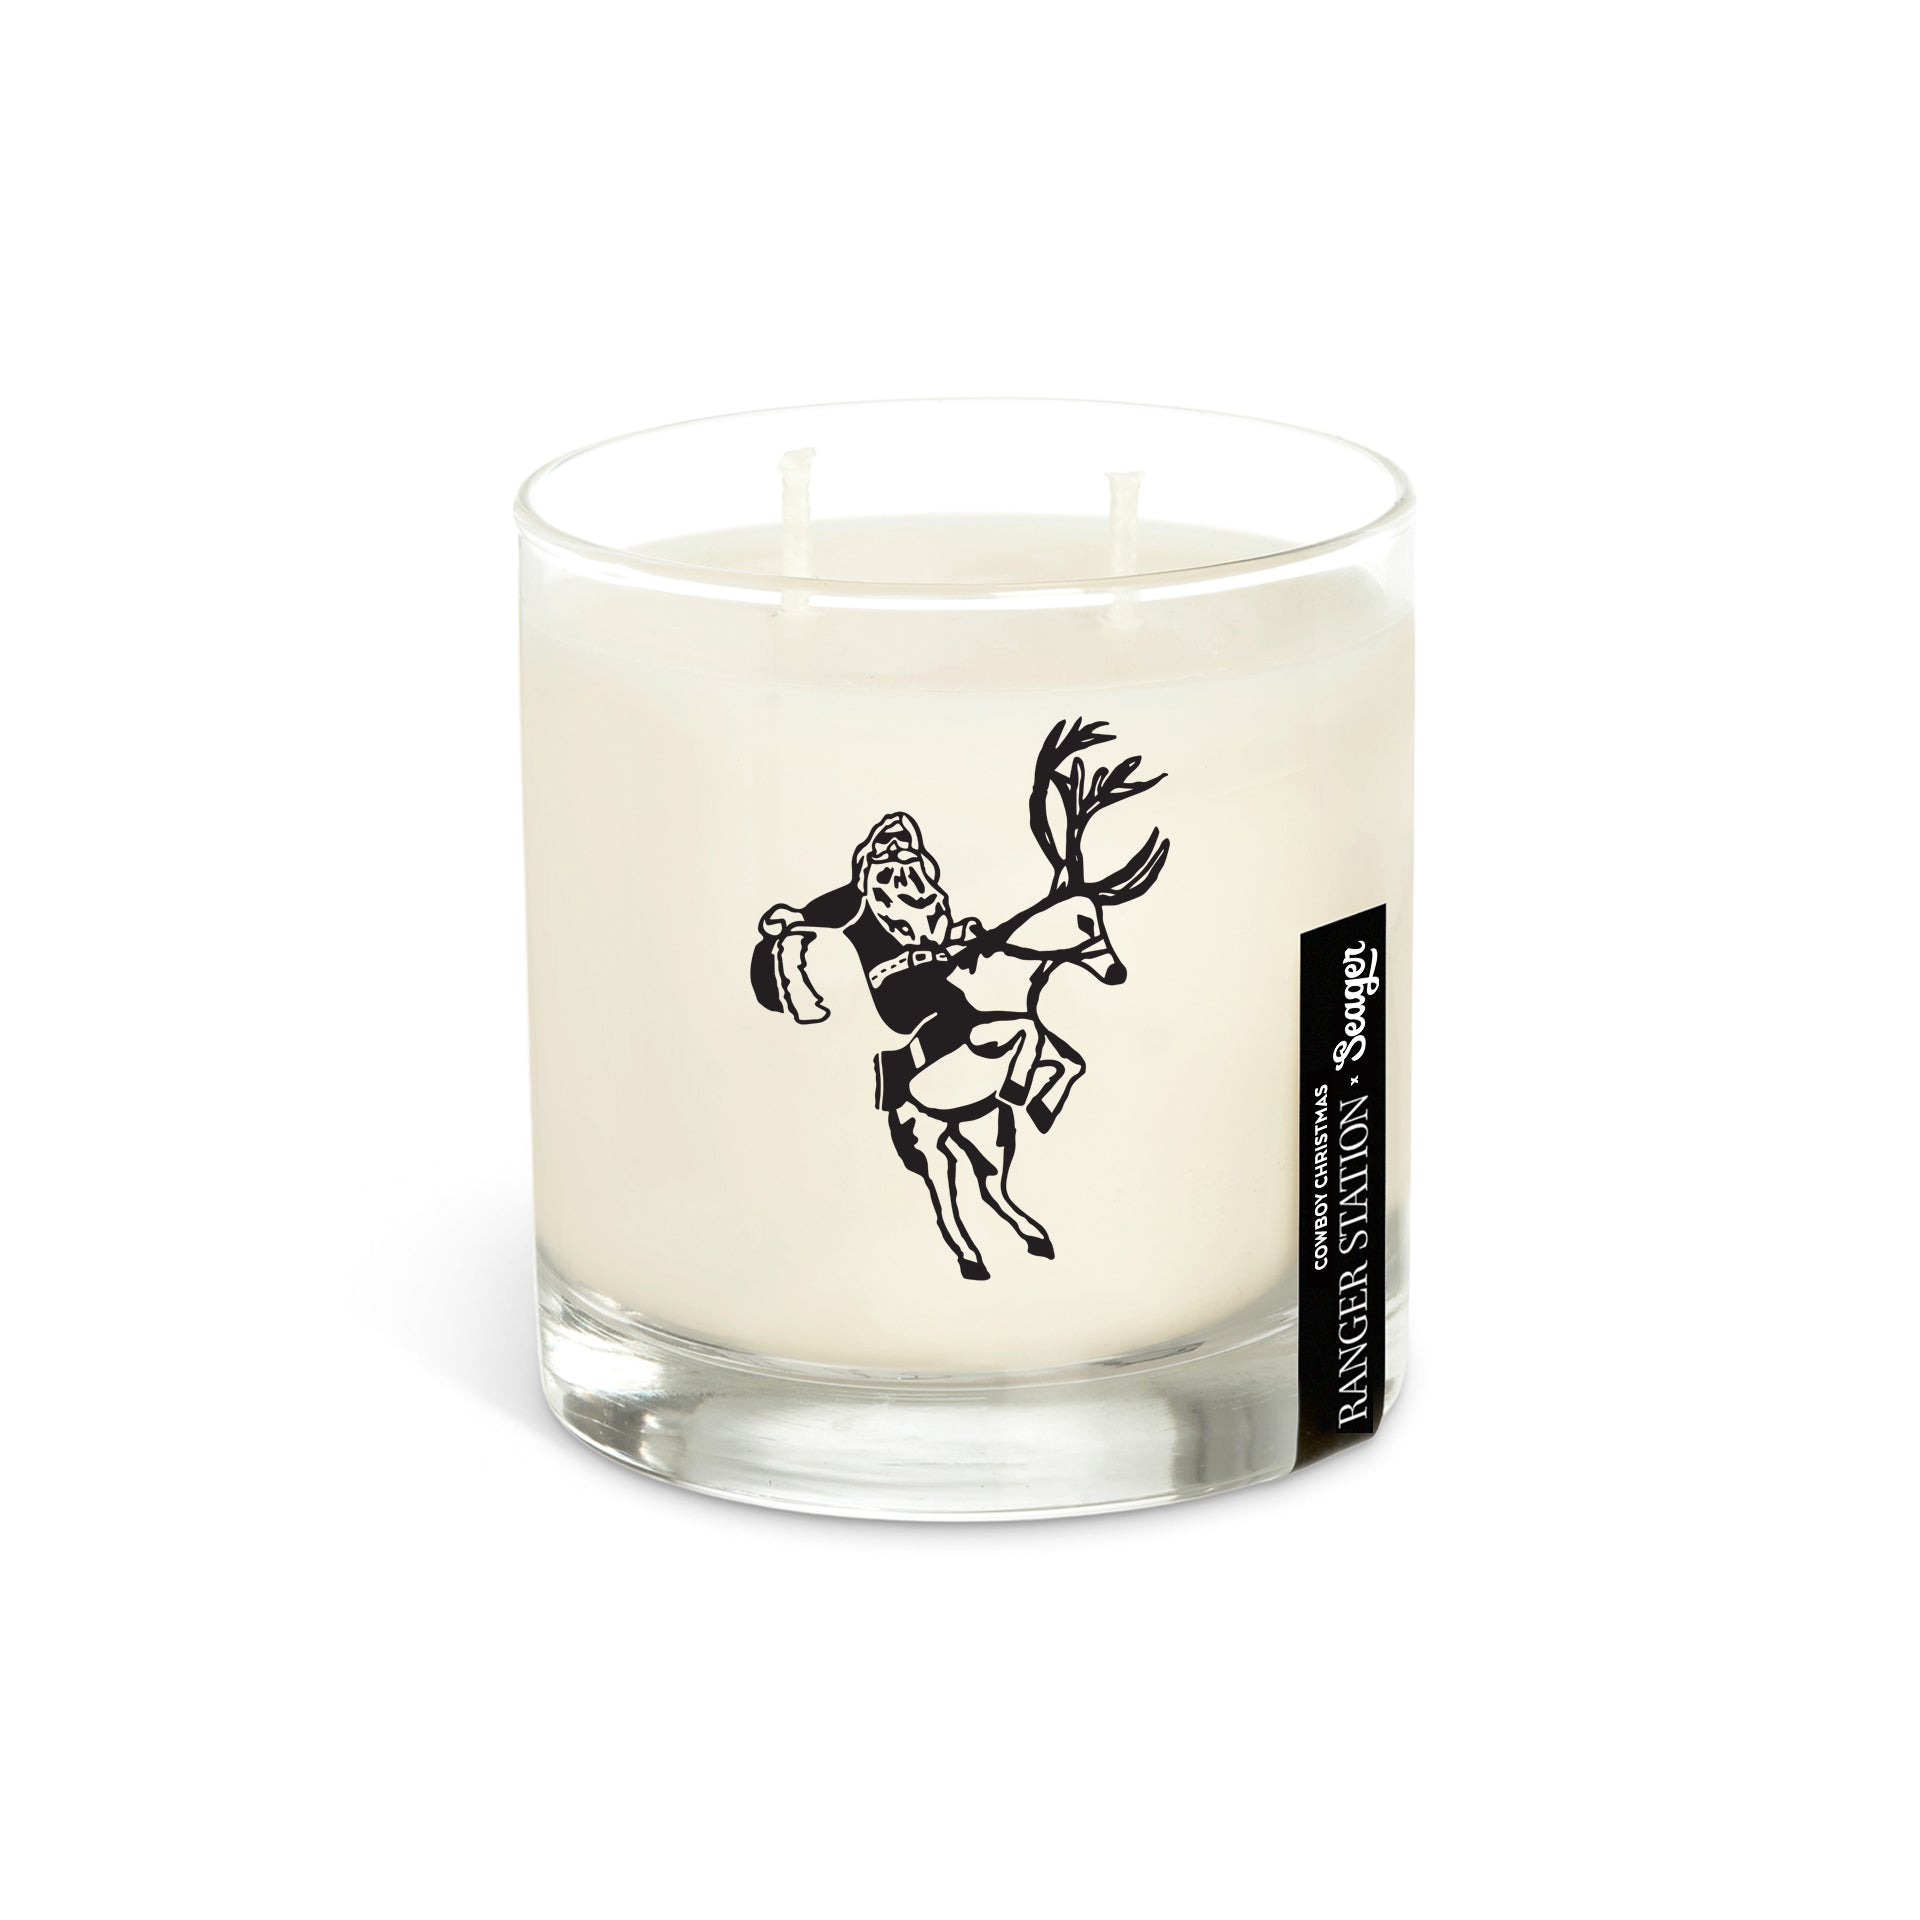 Seager x Ranger Station Cowboy Christmas Candle